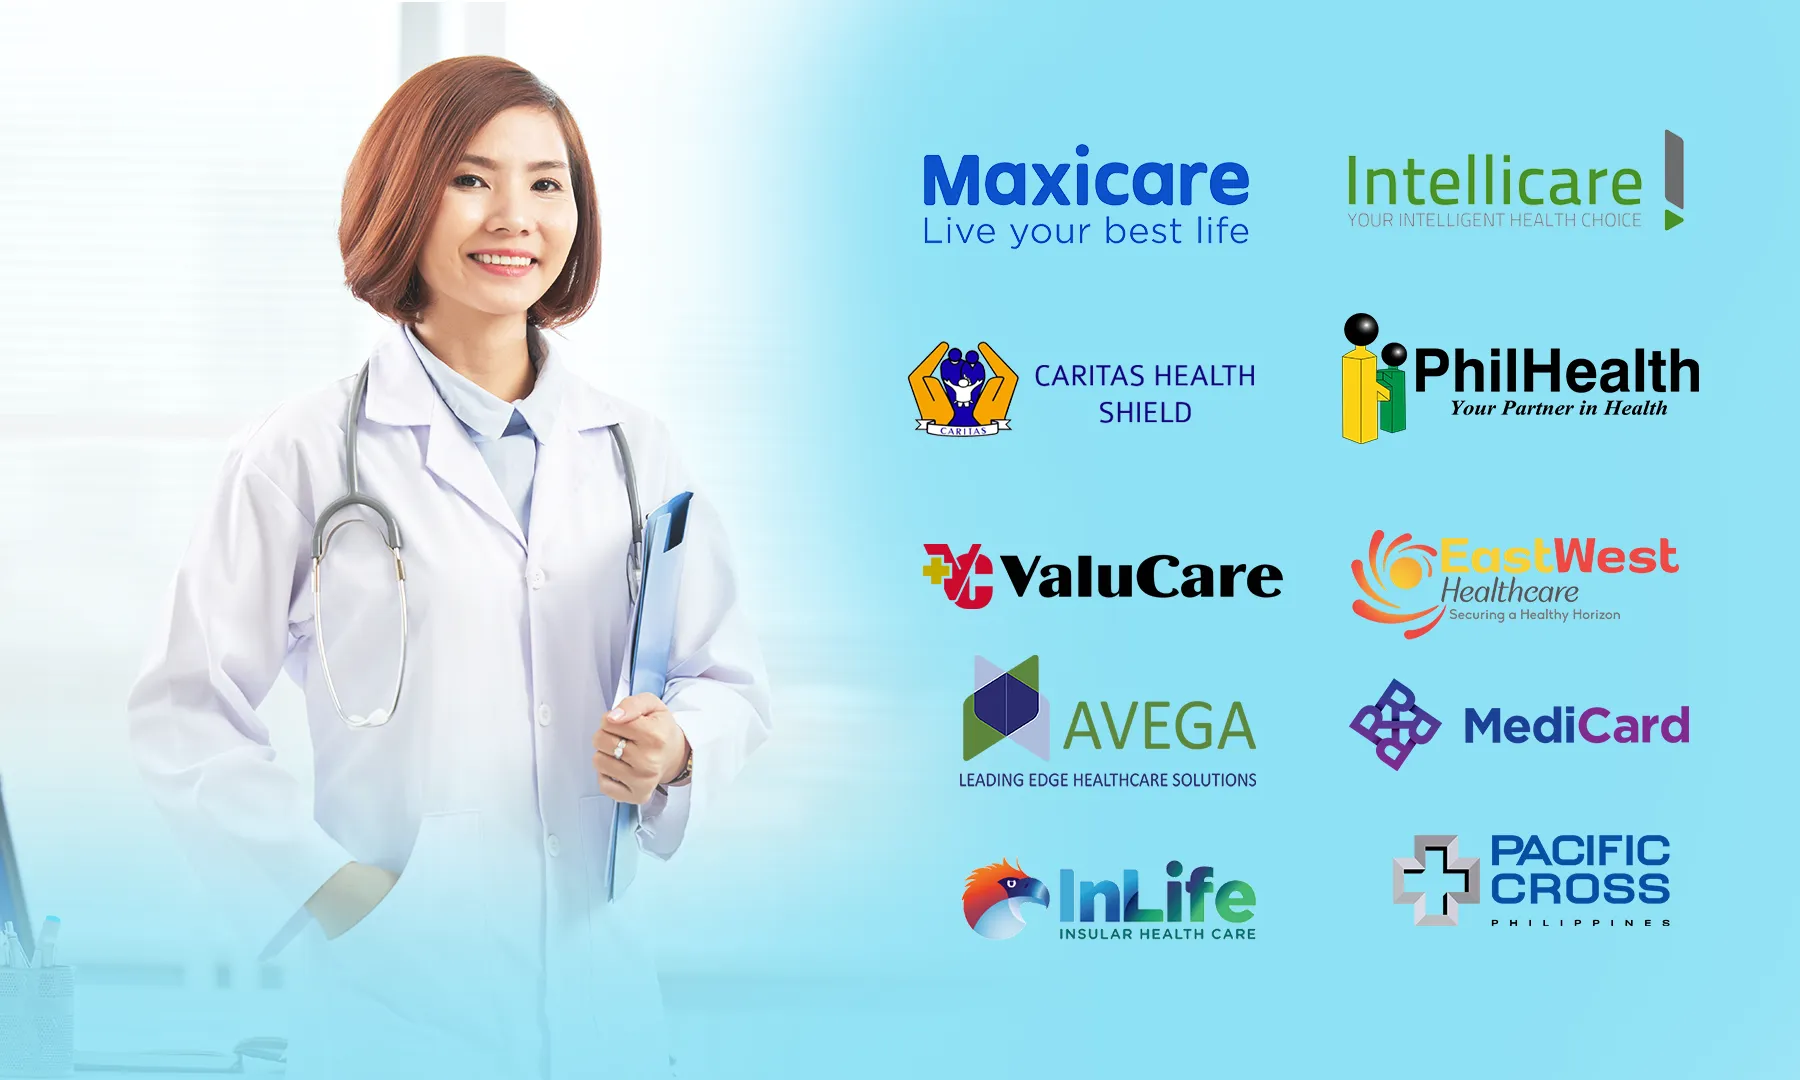 Top Healthcare Providers in the Philippines with Comprehensive Healthcare Plans